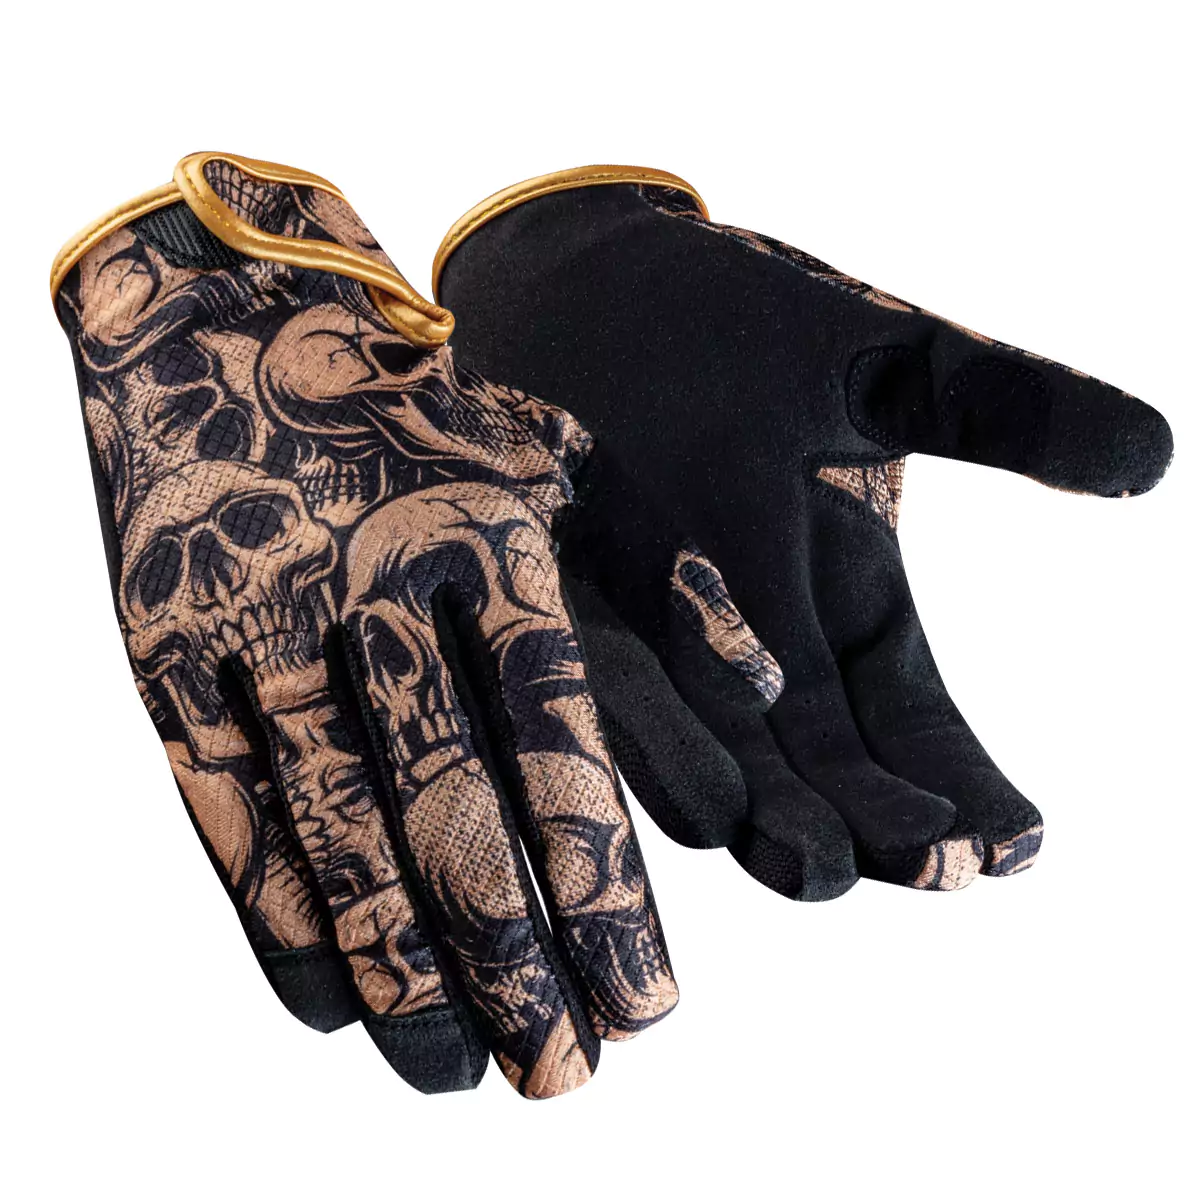 Pair of leather cycling gloves designed for comfort and grip during rides.